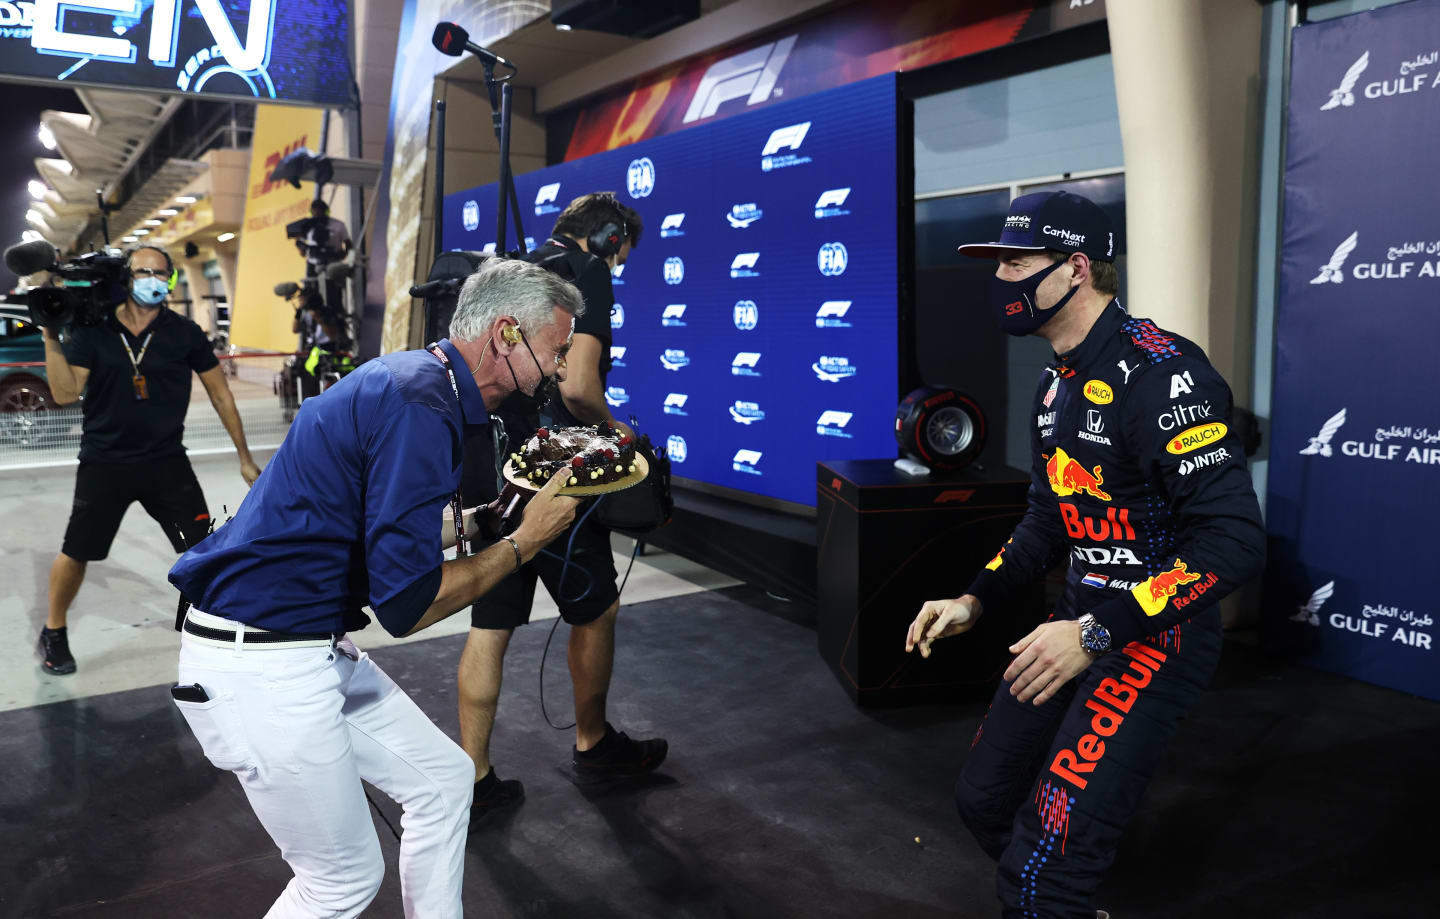 BAHRAIN, BAHRAIN - MARCH 27: Pole position qualifier Max Verstappen of Netherlands and Red Bull Racing puts a cake in the face of TV presenter and former racing driver David Coulthard in parc ferme during qualifying ahead of the F1 Grand Prix of Bahrain at Bahrain International Circuit on March 27, 2021 in Bahrain, Bahrain. (Photo by Lars Baron/Getty Images)